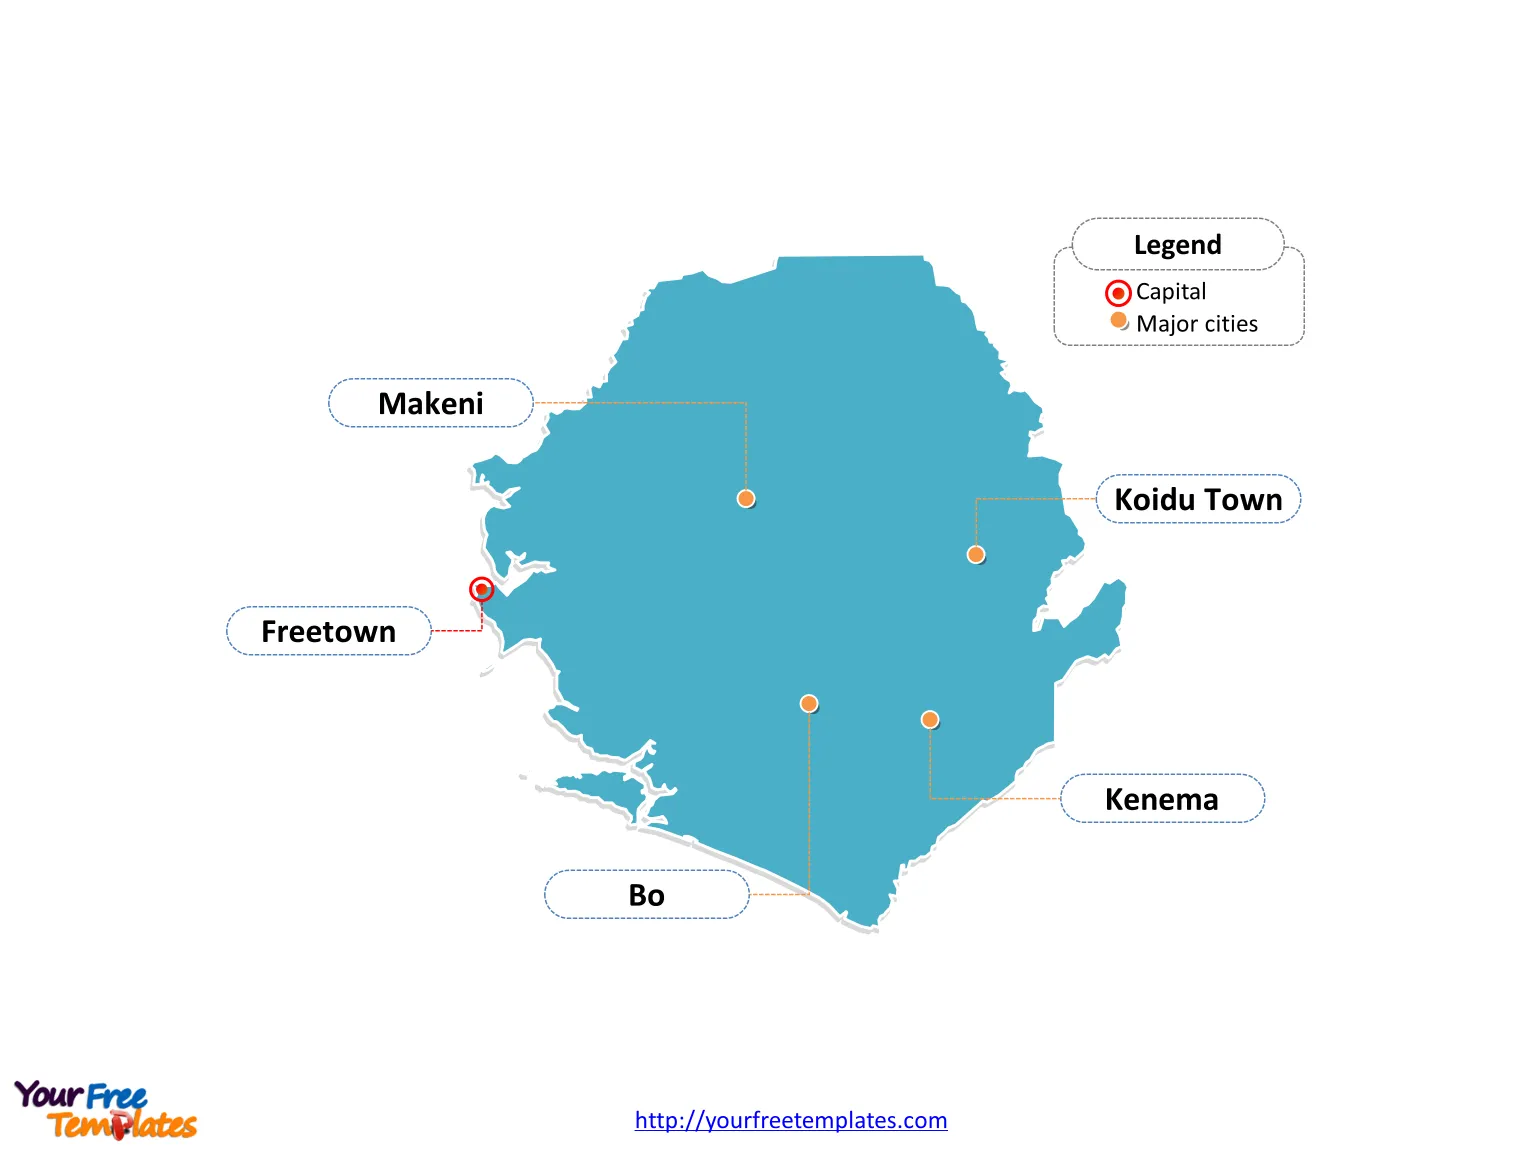 Sierra Leone Editable map labeled with cities